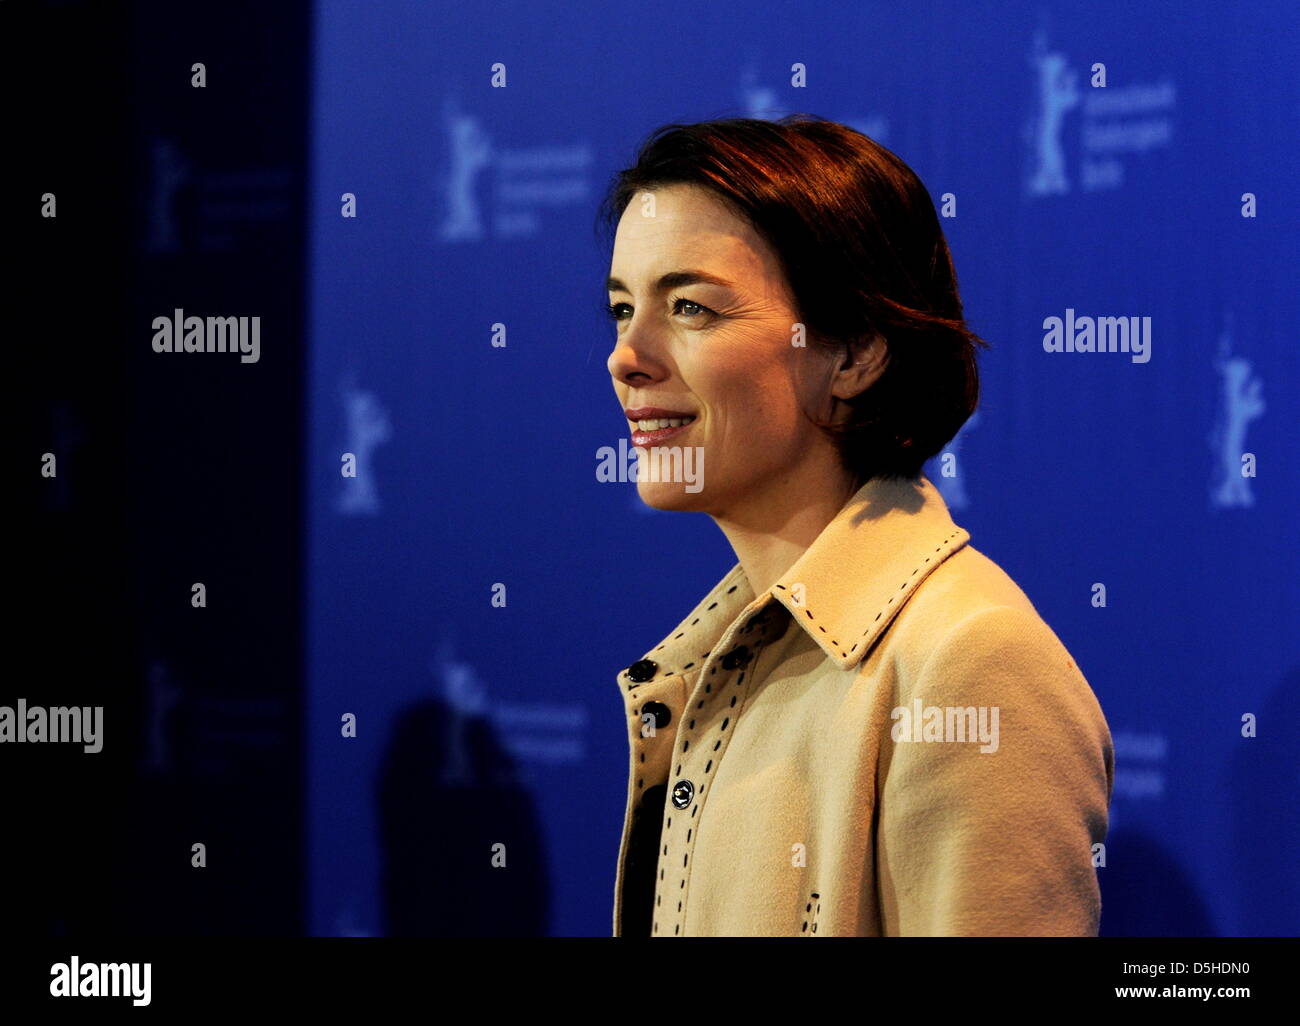 British actress Olivia Williams attends the photocall for the film 'The Ghost Writer' running in competion during the 60th Berlinale international film festival Friday, 12 February 2010 in Berlin. Photo: Marcus Brandt dpa/lbn Stock Photo